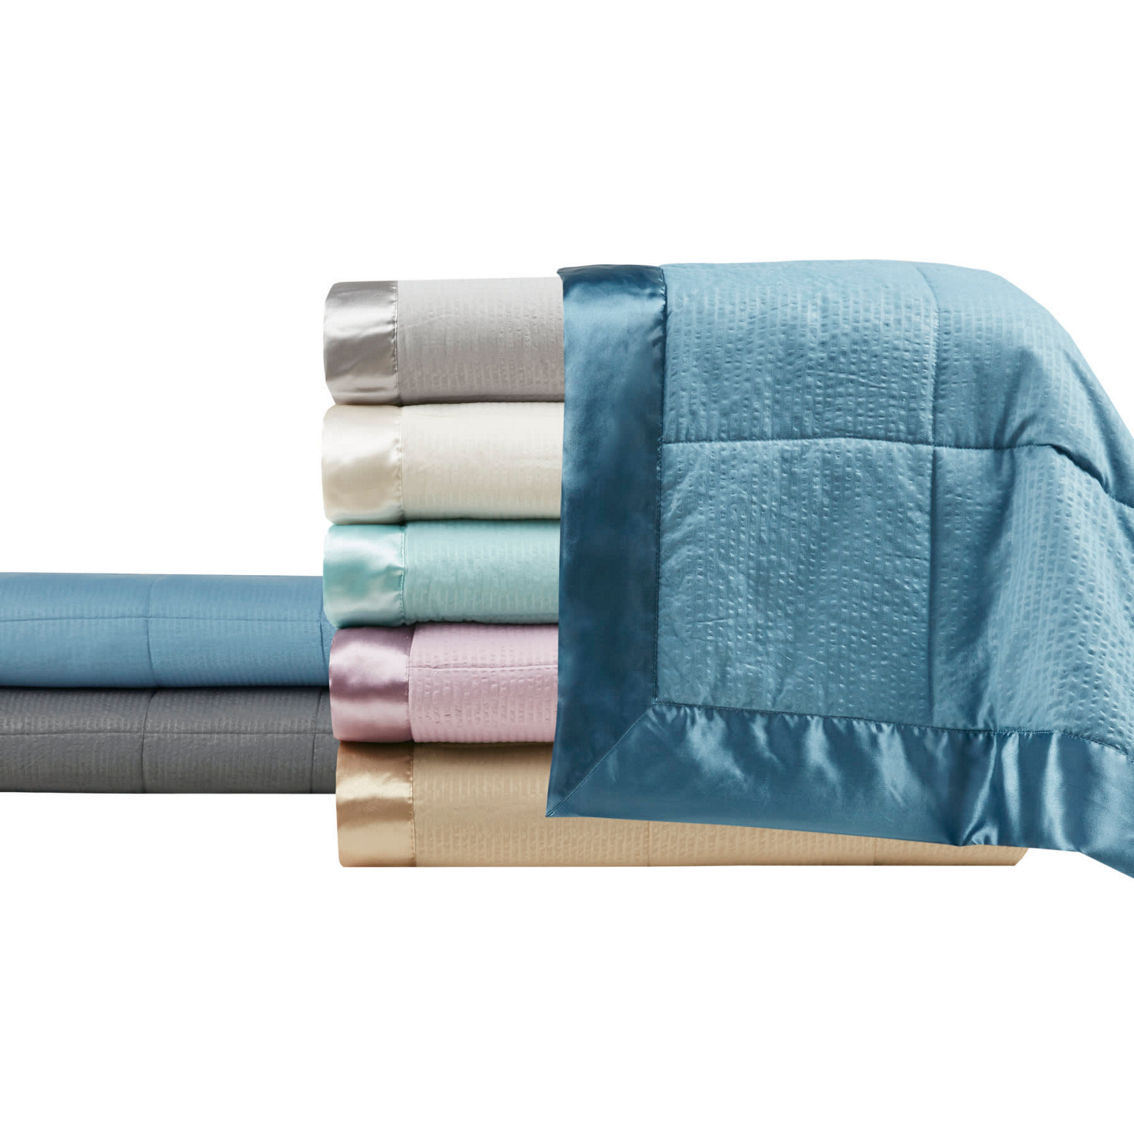 Madison Park Campbell Reversible HeiQ Smart Temperature Down Alternative Blanket - Image 5 of 5